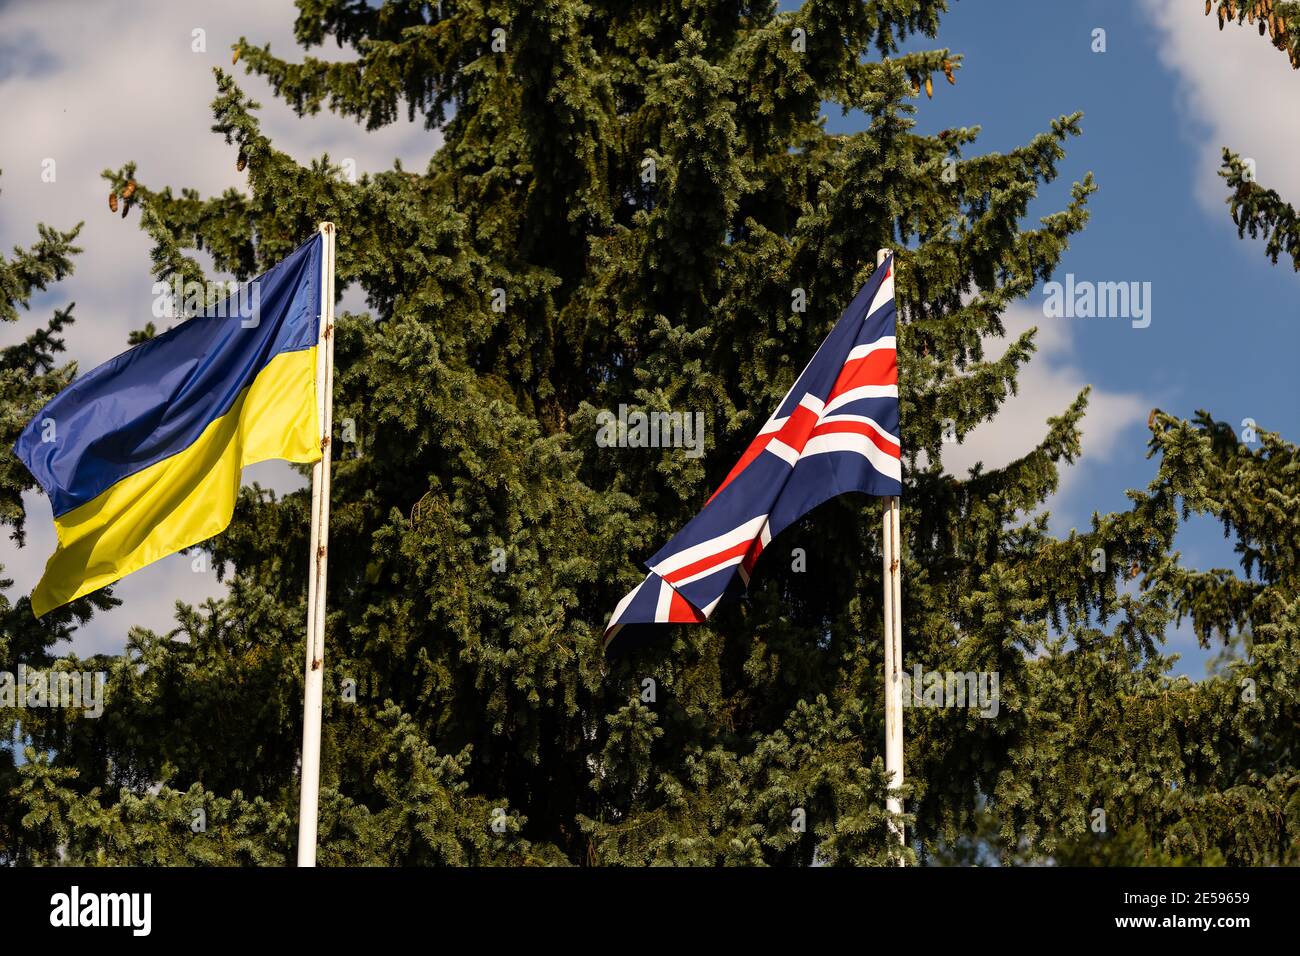 Flags of Ukraine and United Kingdom of Great Britain Stock Photo